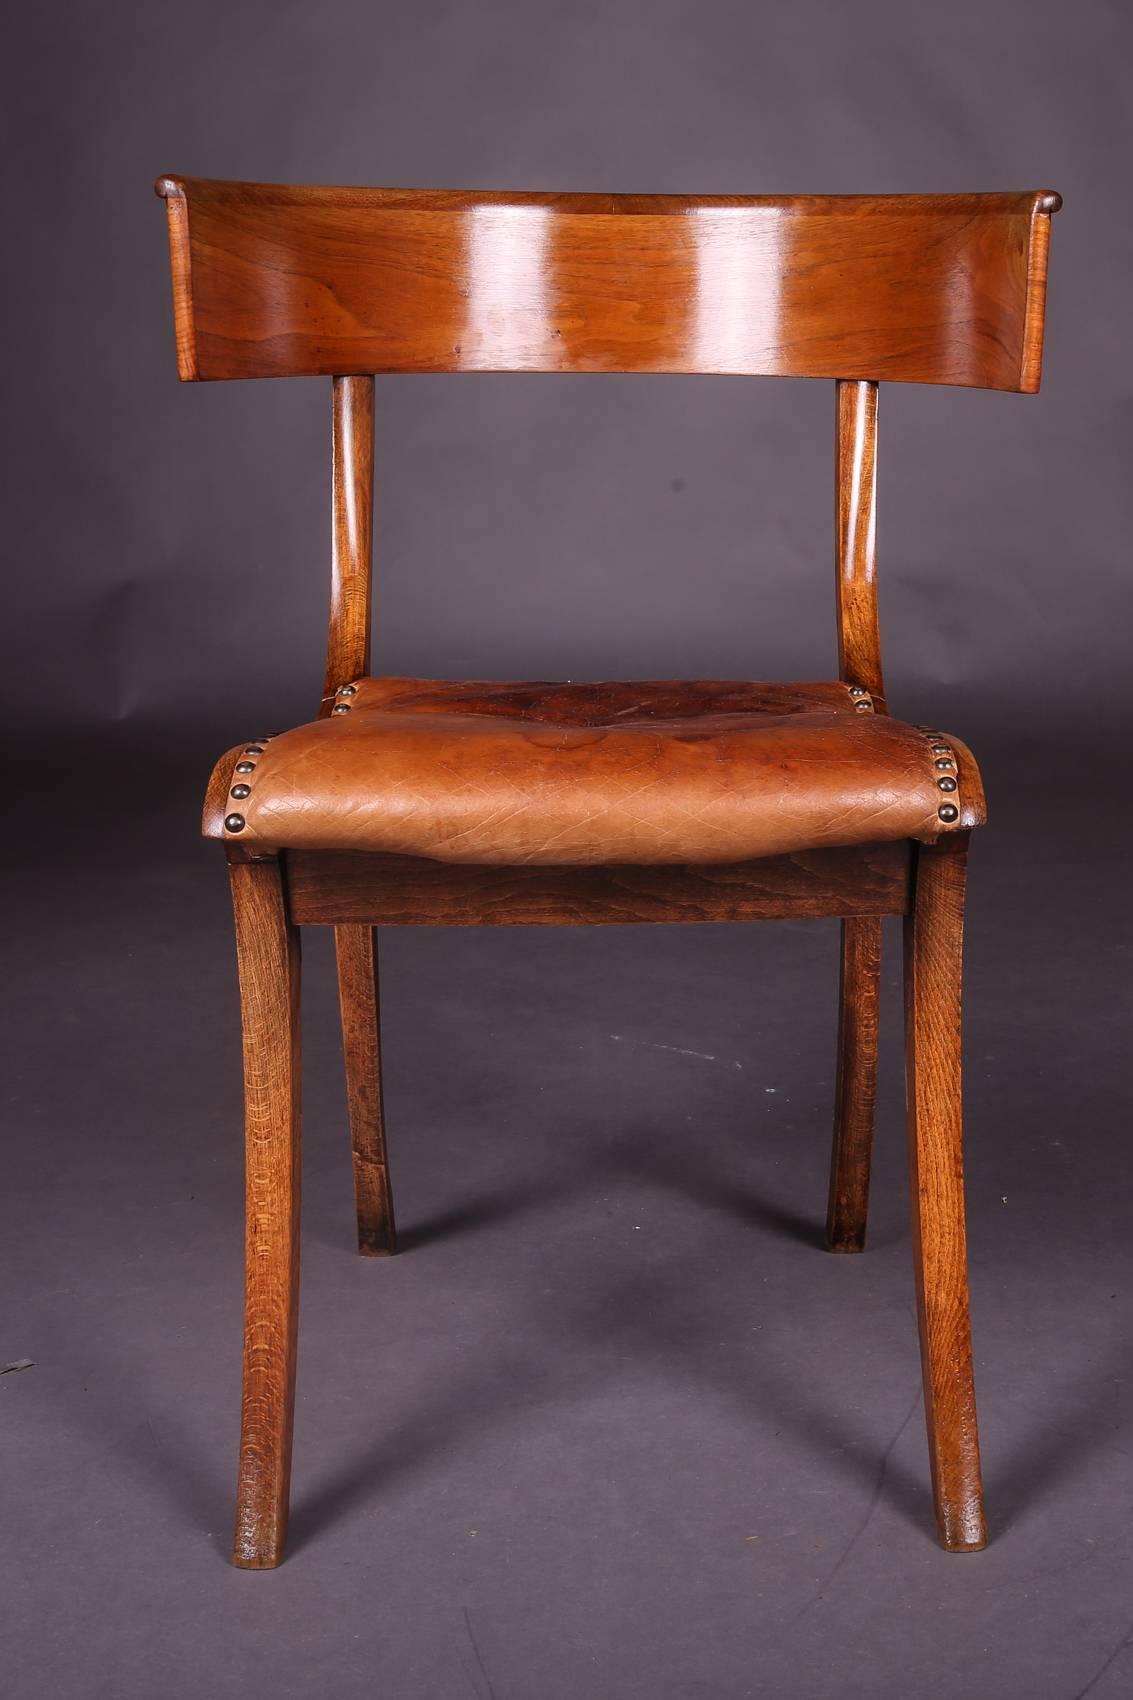 Chair of the Greek antique.
Solid wood. The striking shape with the wide-legged saber legs and the encircling backrest board was rediscovered in classicism, circa 1800. In this specimen, however, the pure basic form of the Klismos still exists. It